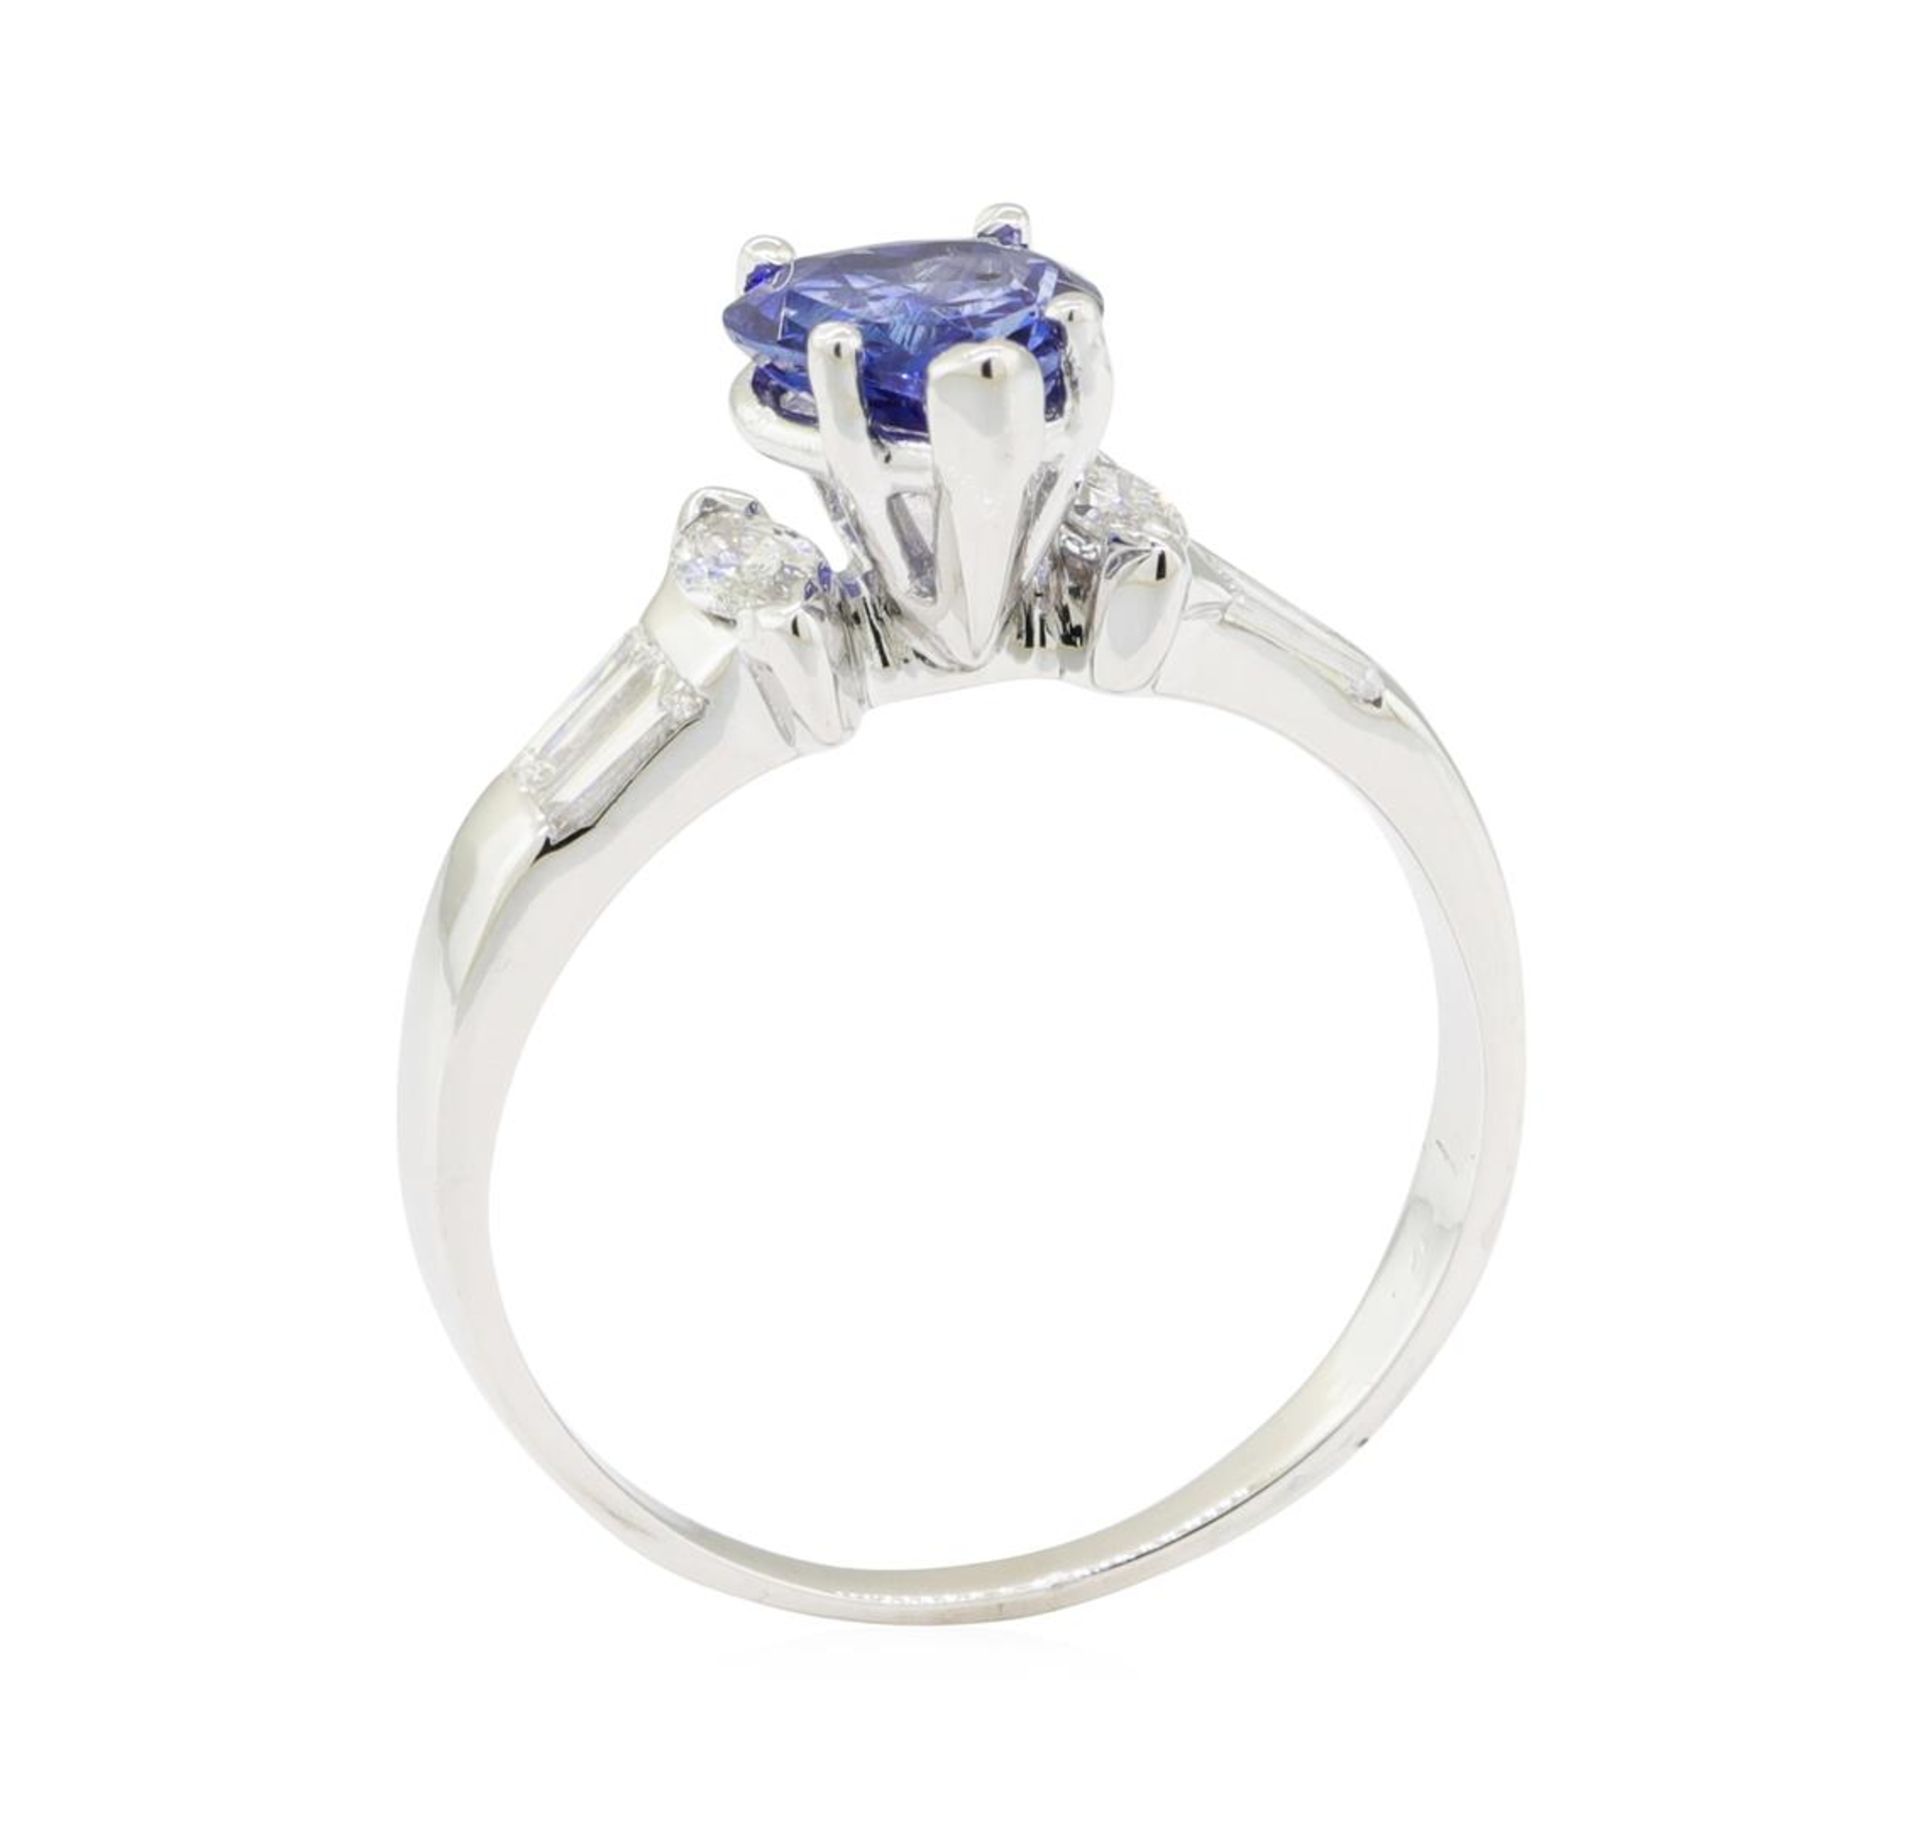 1.87 ctw Sapphire and Diamond Ring - 14KT White Gold - Image 4 of 5